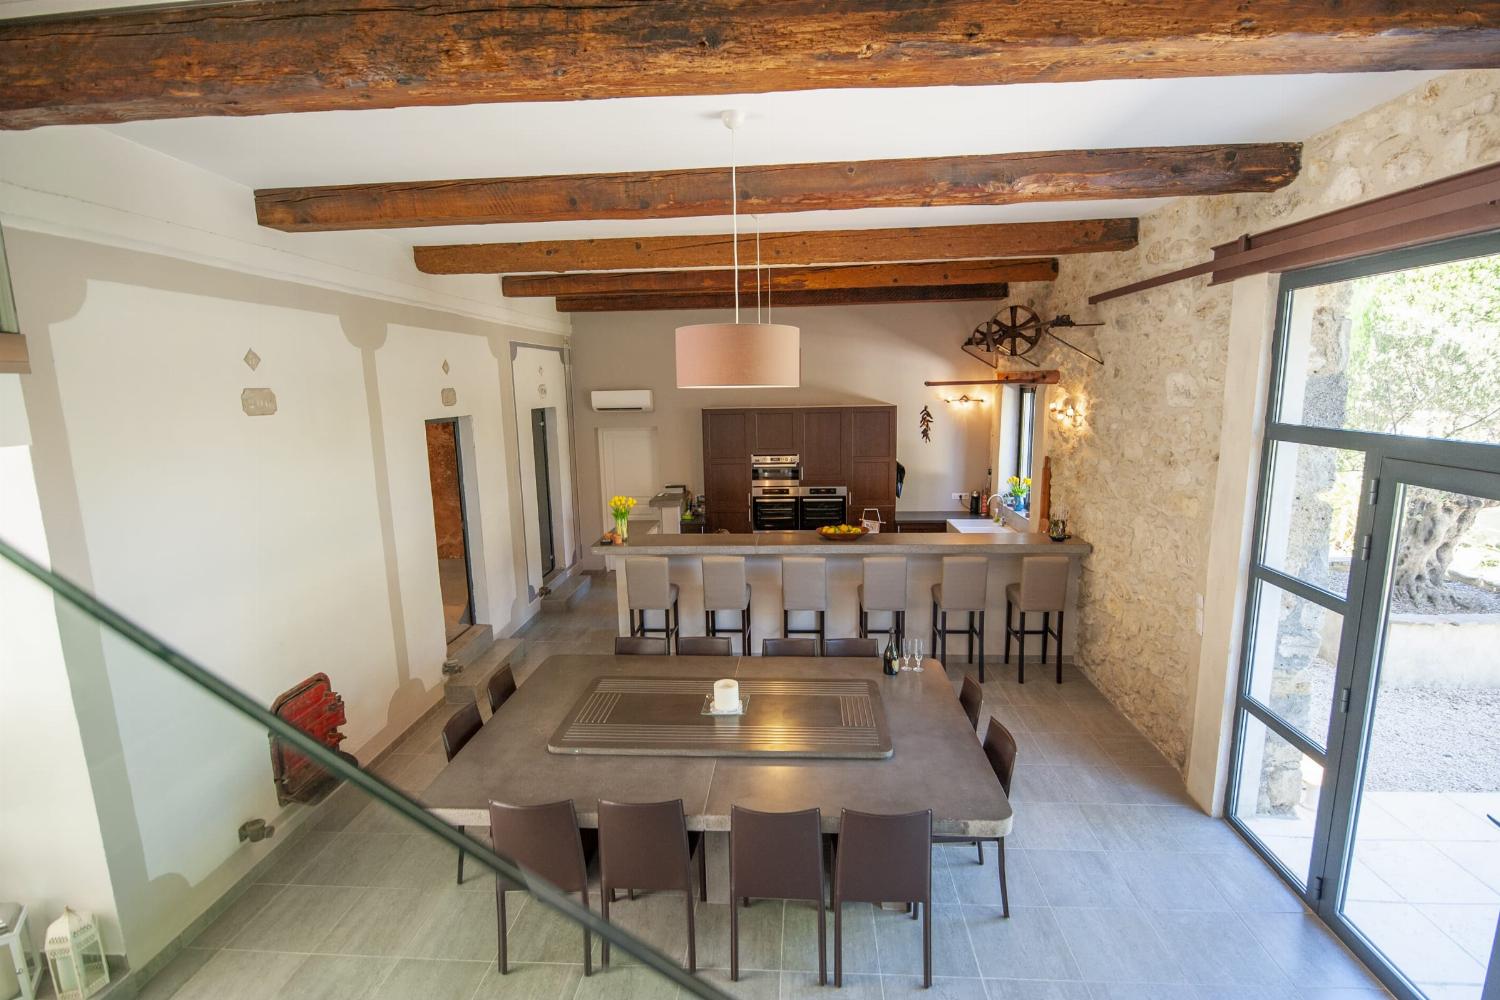 Dining room and kitchen | Holiday home in South of France